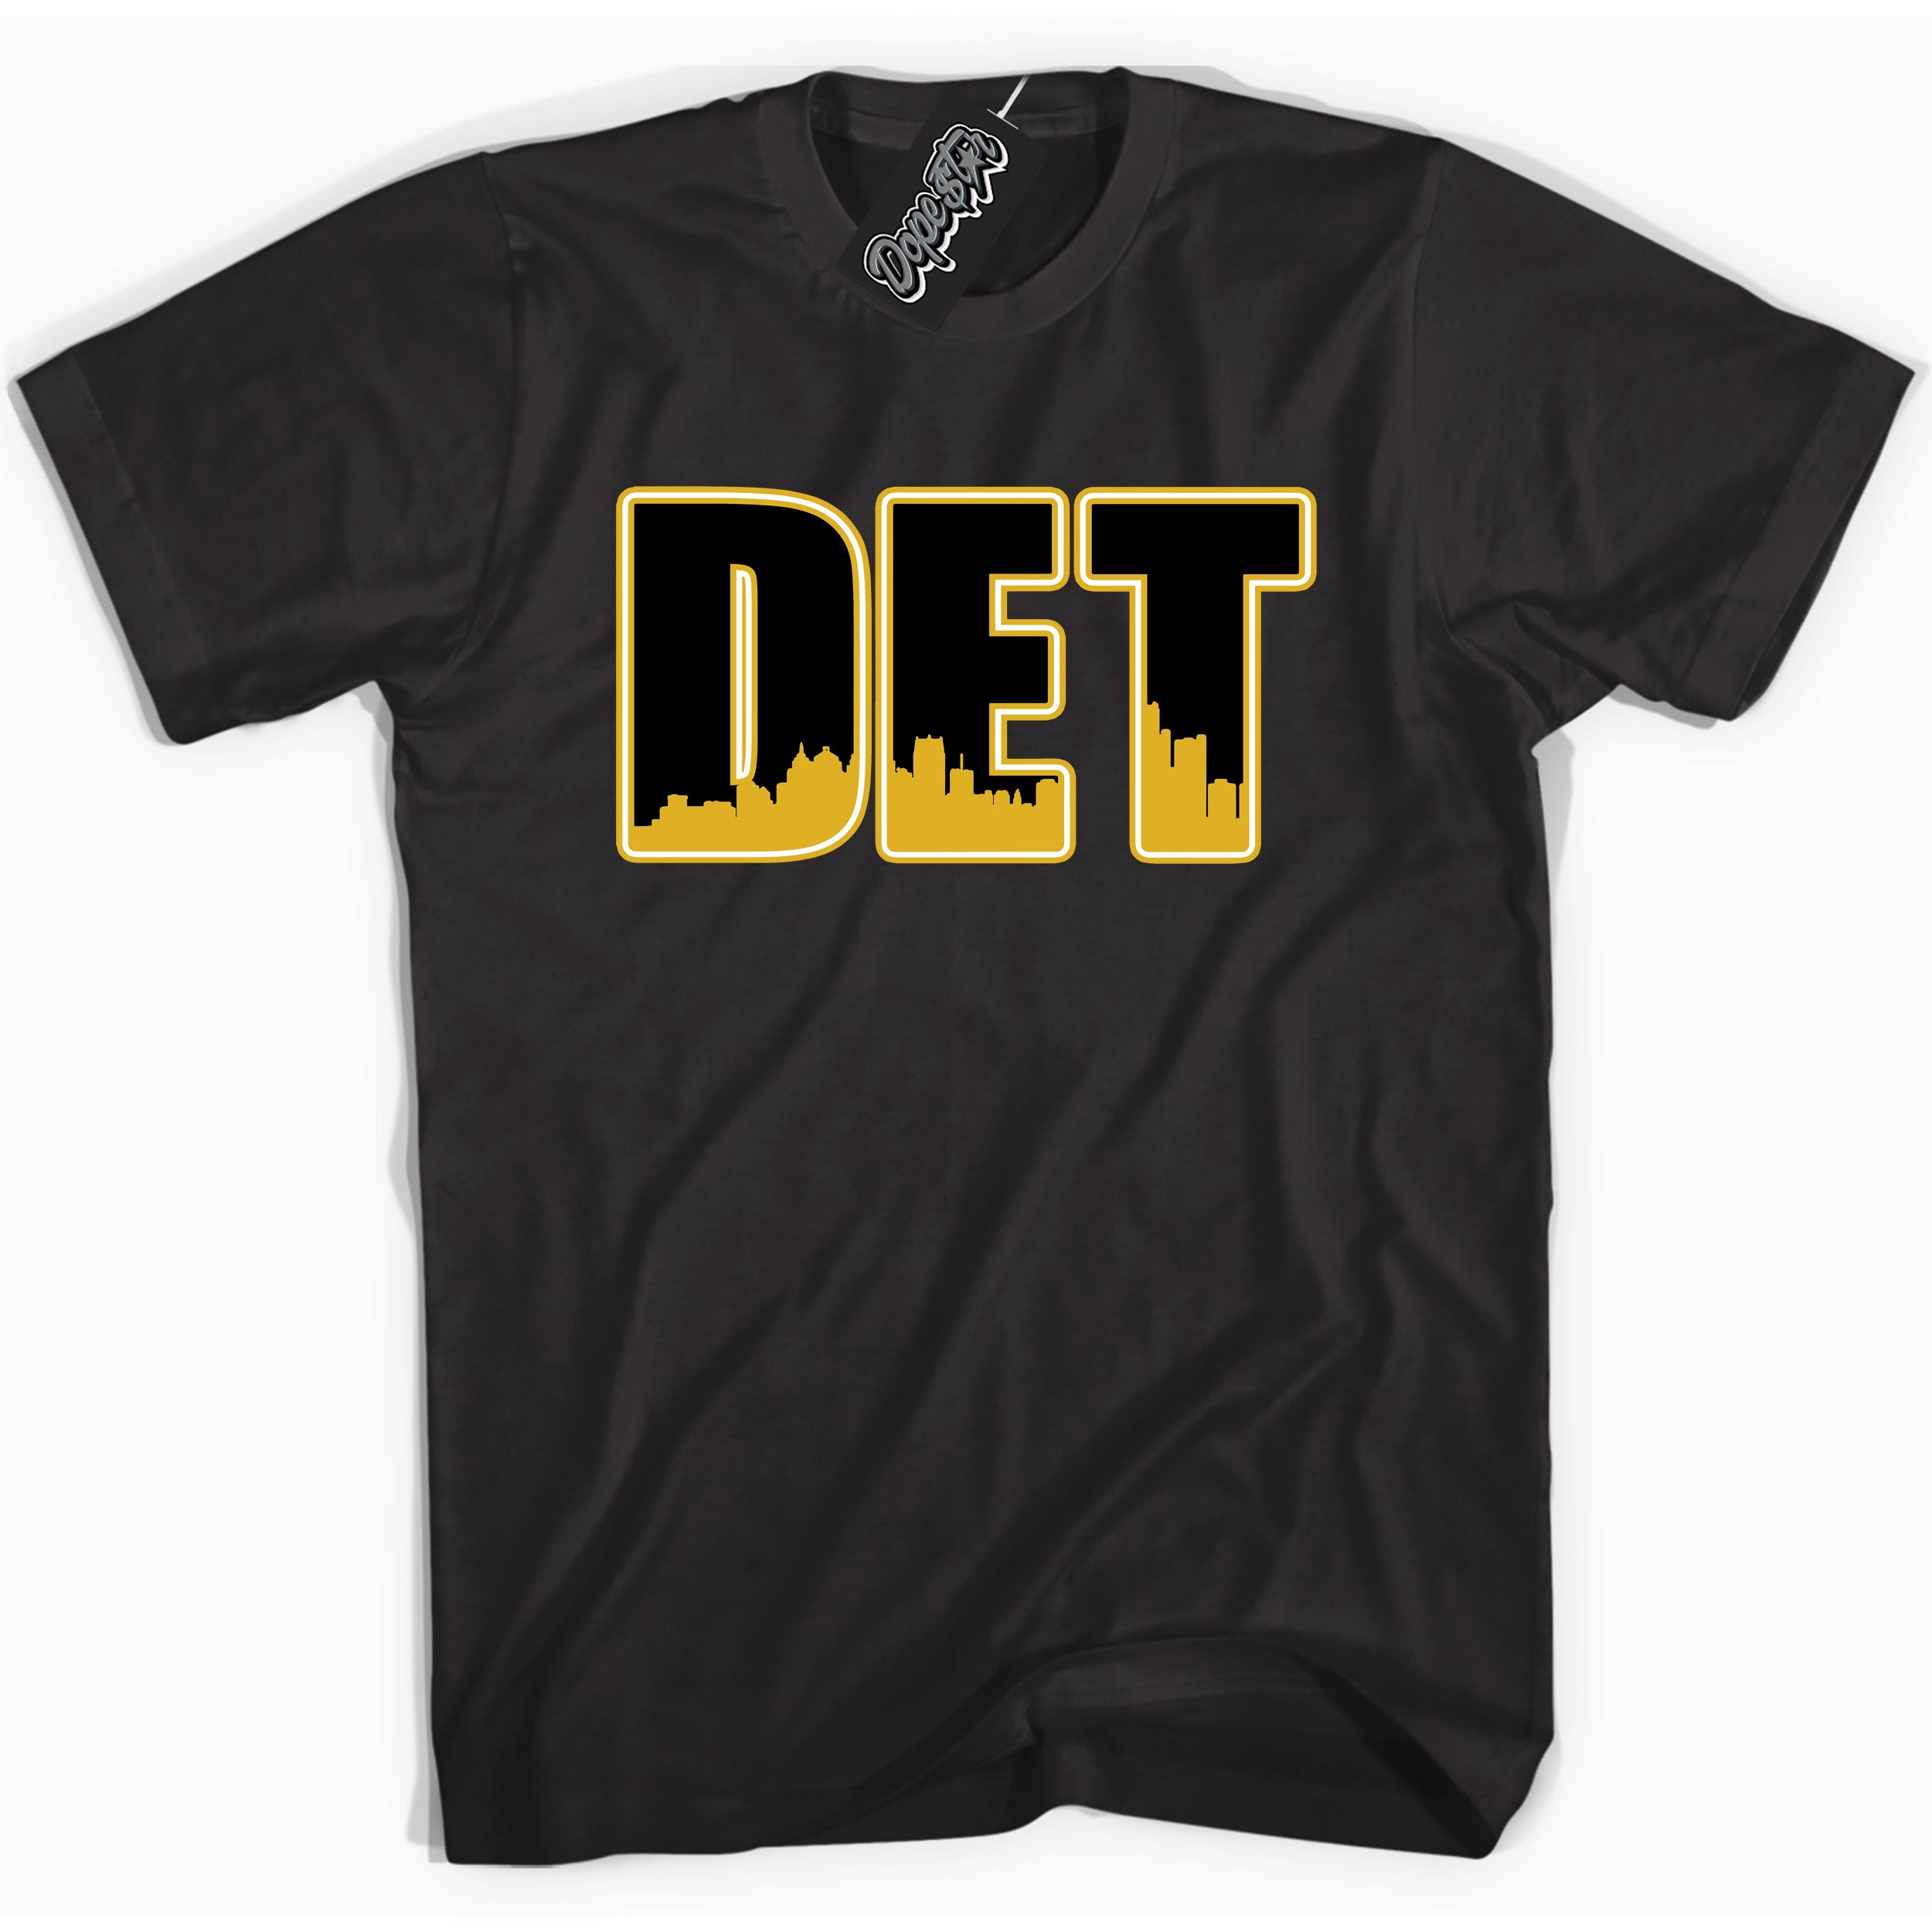 Cool Black Shirt with “ Detroit ” design that perfectly matches Yellow Ochre 6s Sneakers.